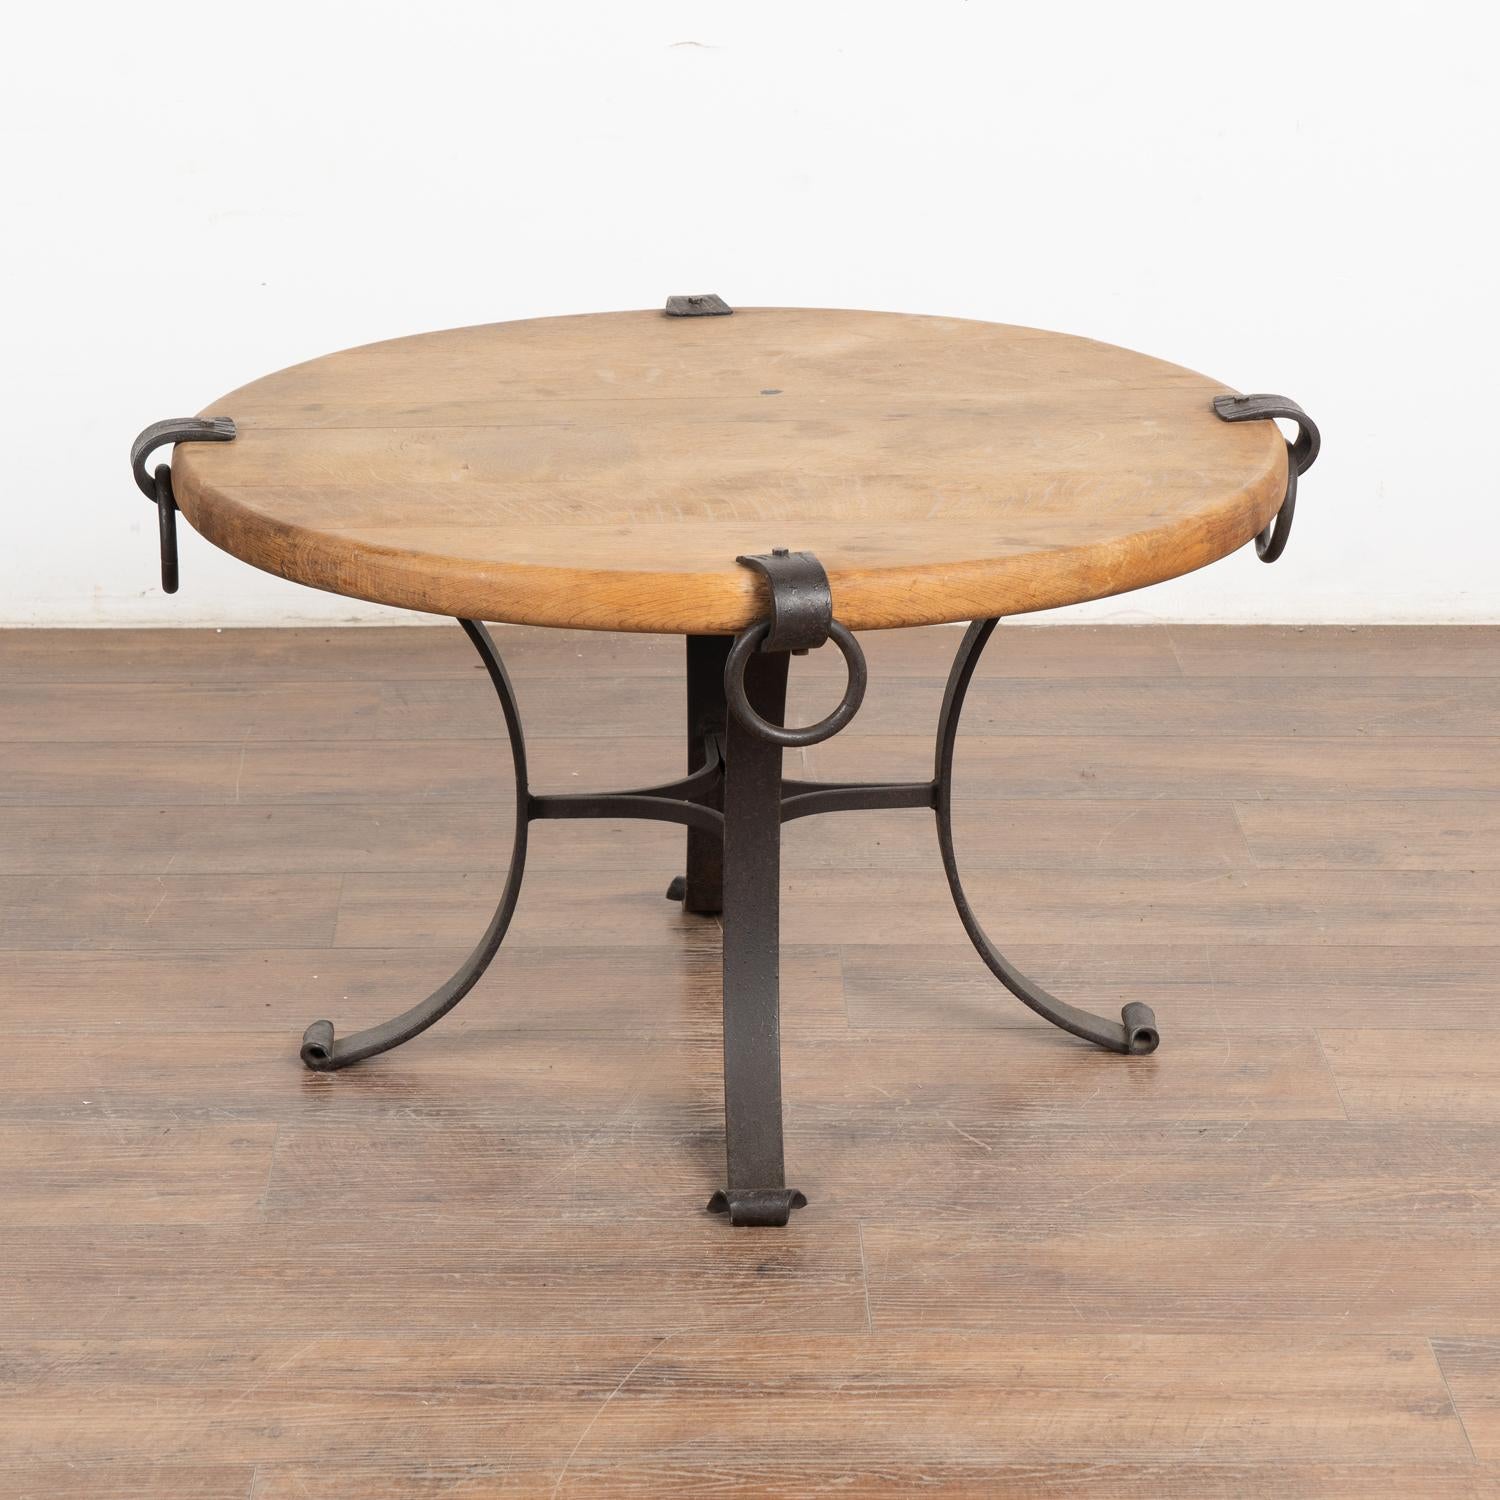 This rustic coffee table may also serve as a unique side table, thanks to the vintage iron rings, legs/base that accent the warm patina of the worn hard wood beech top. Typical age-related scratches, dings, minor separation of planks and multiple